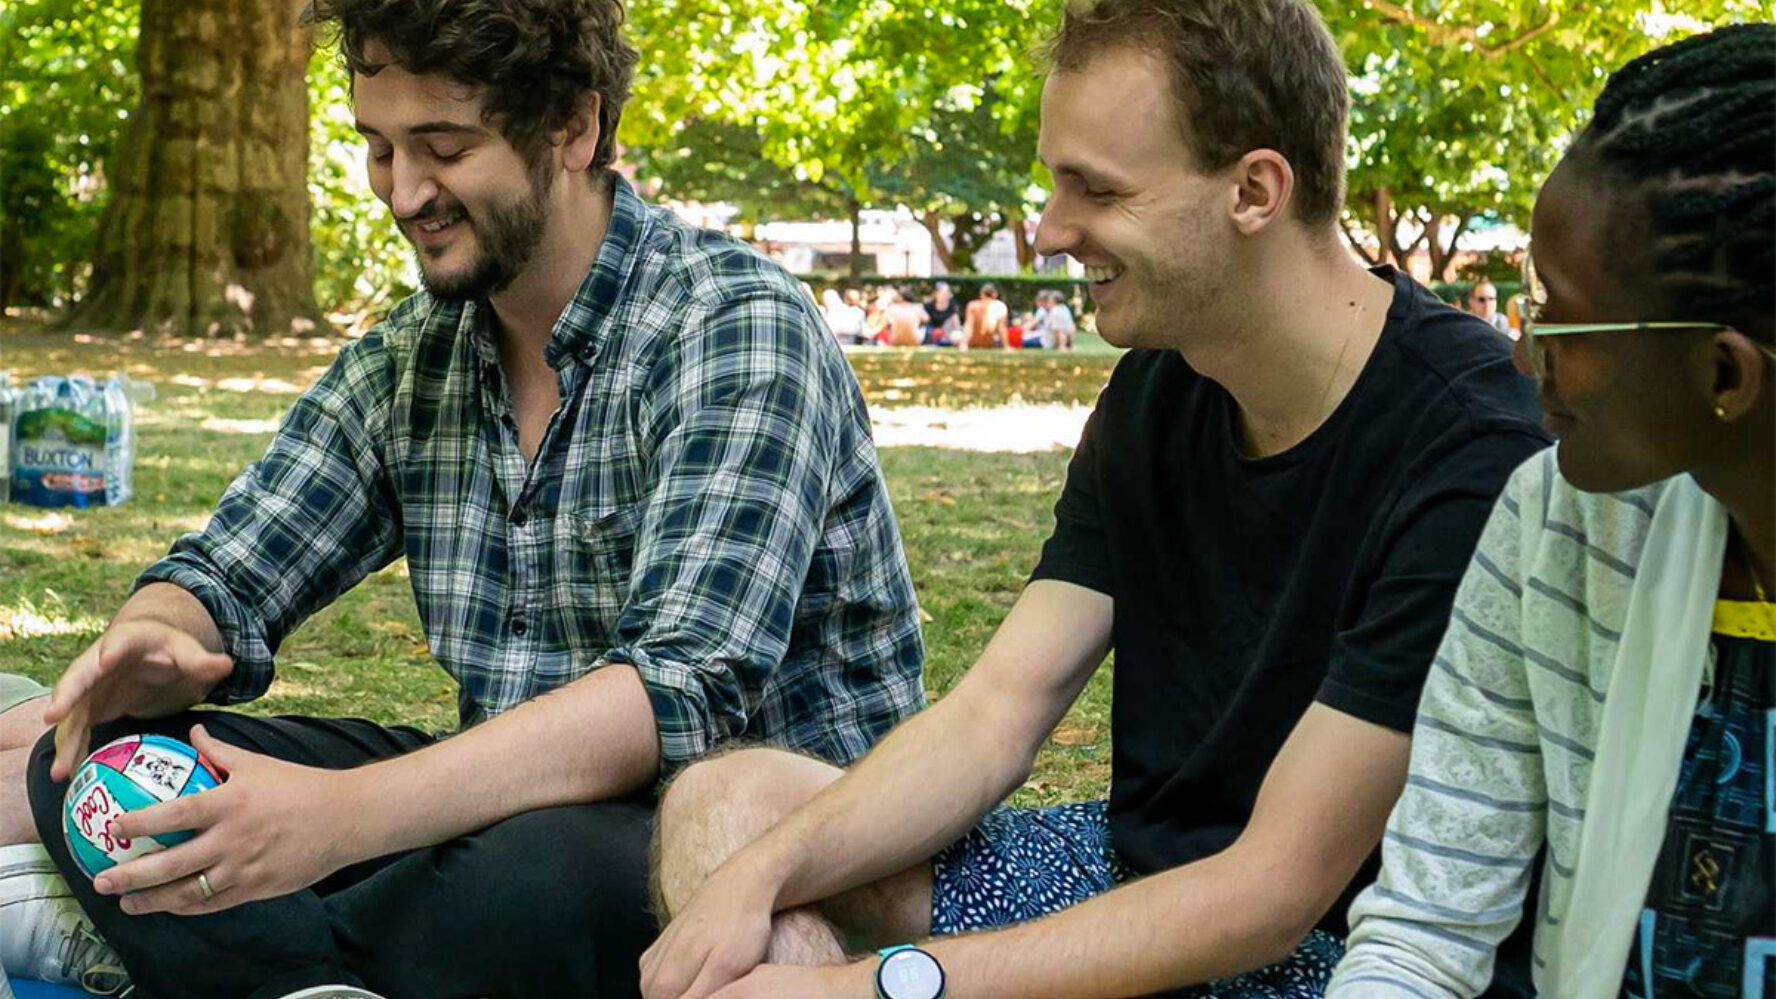 Three people sitting at a picnic in a sunny park, they are smiling.